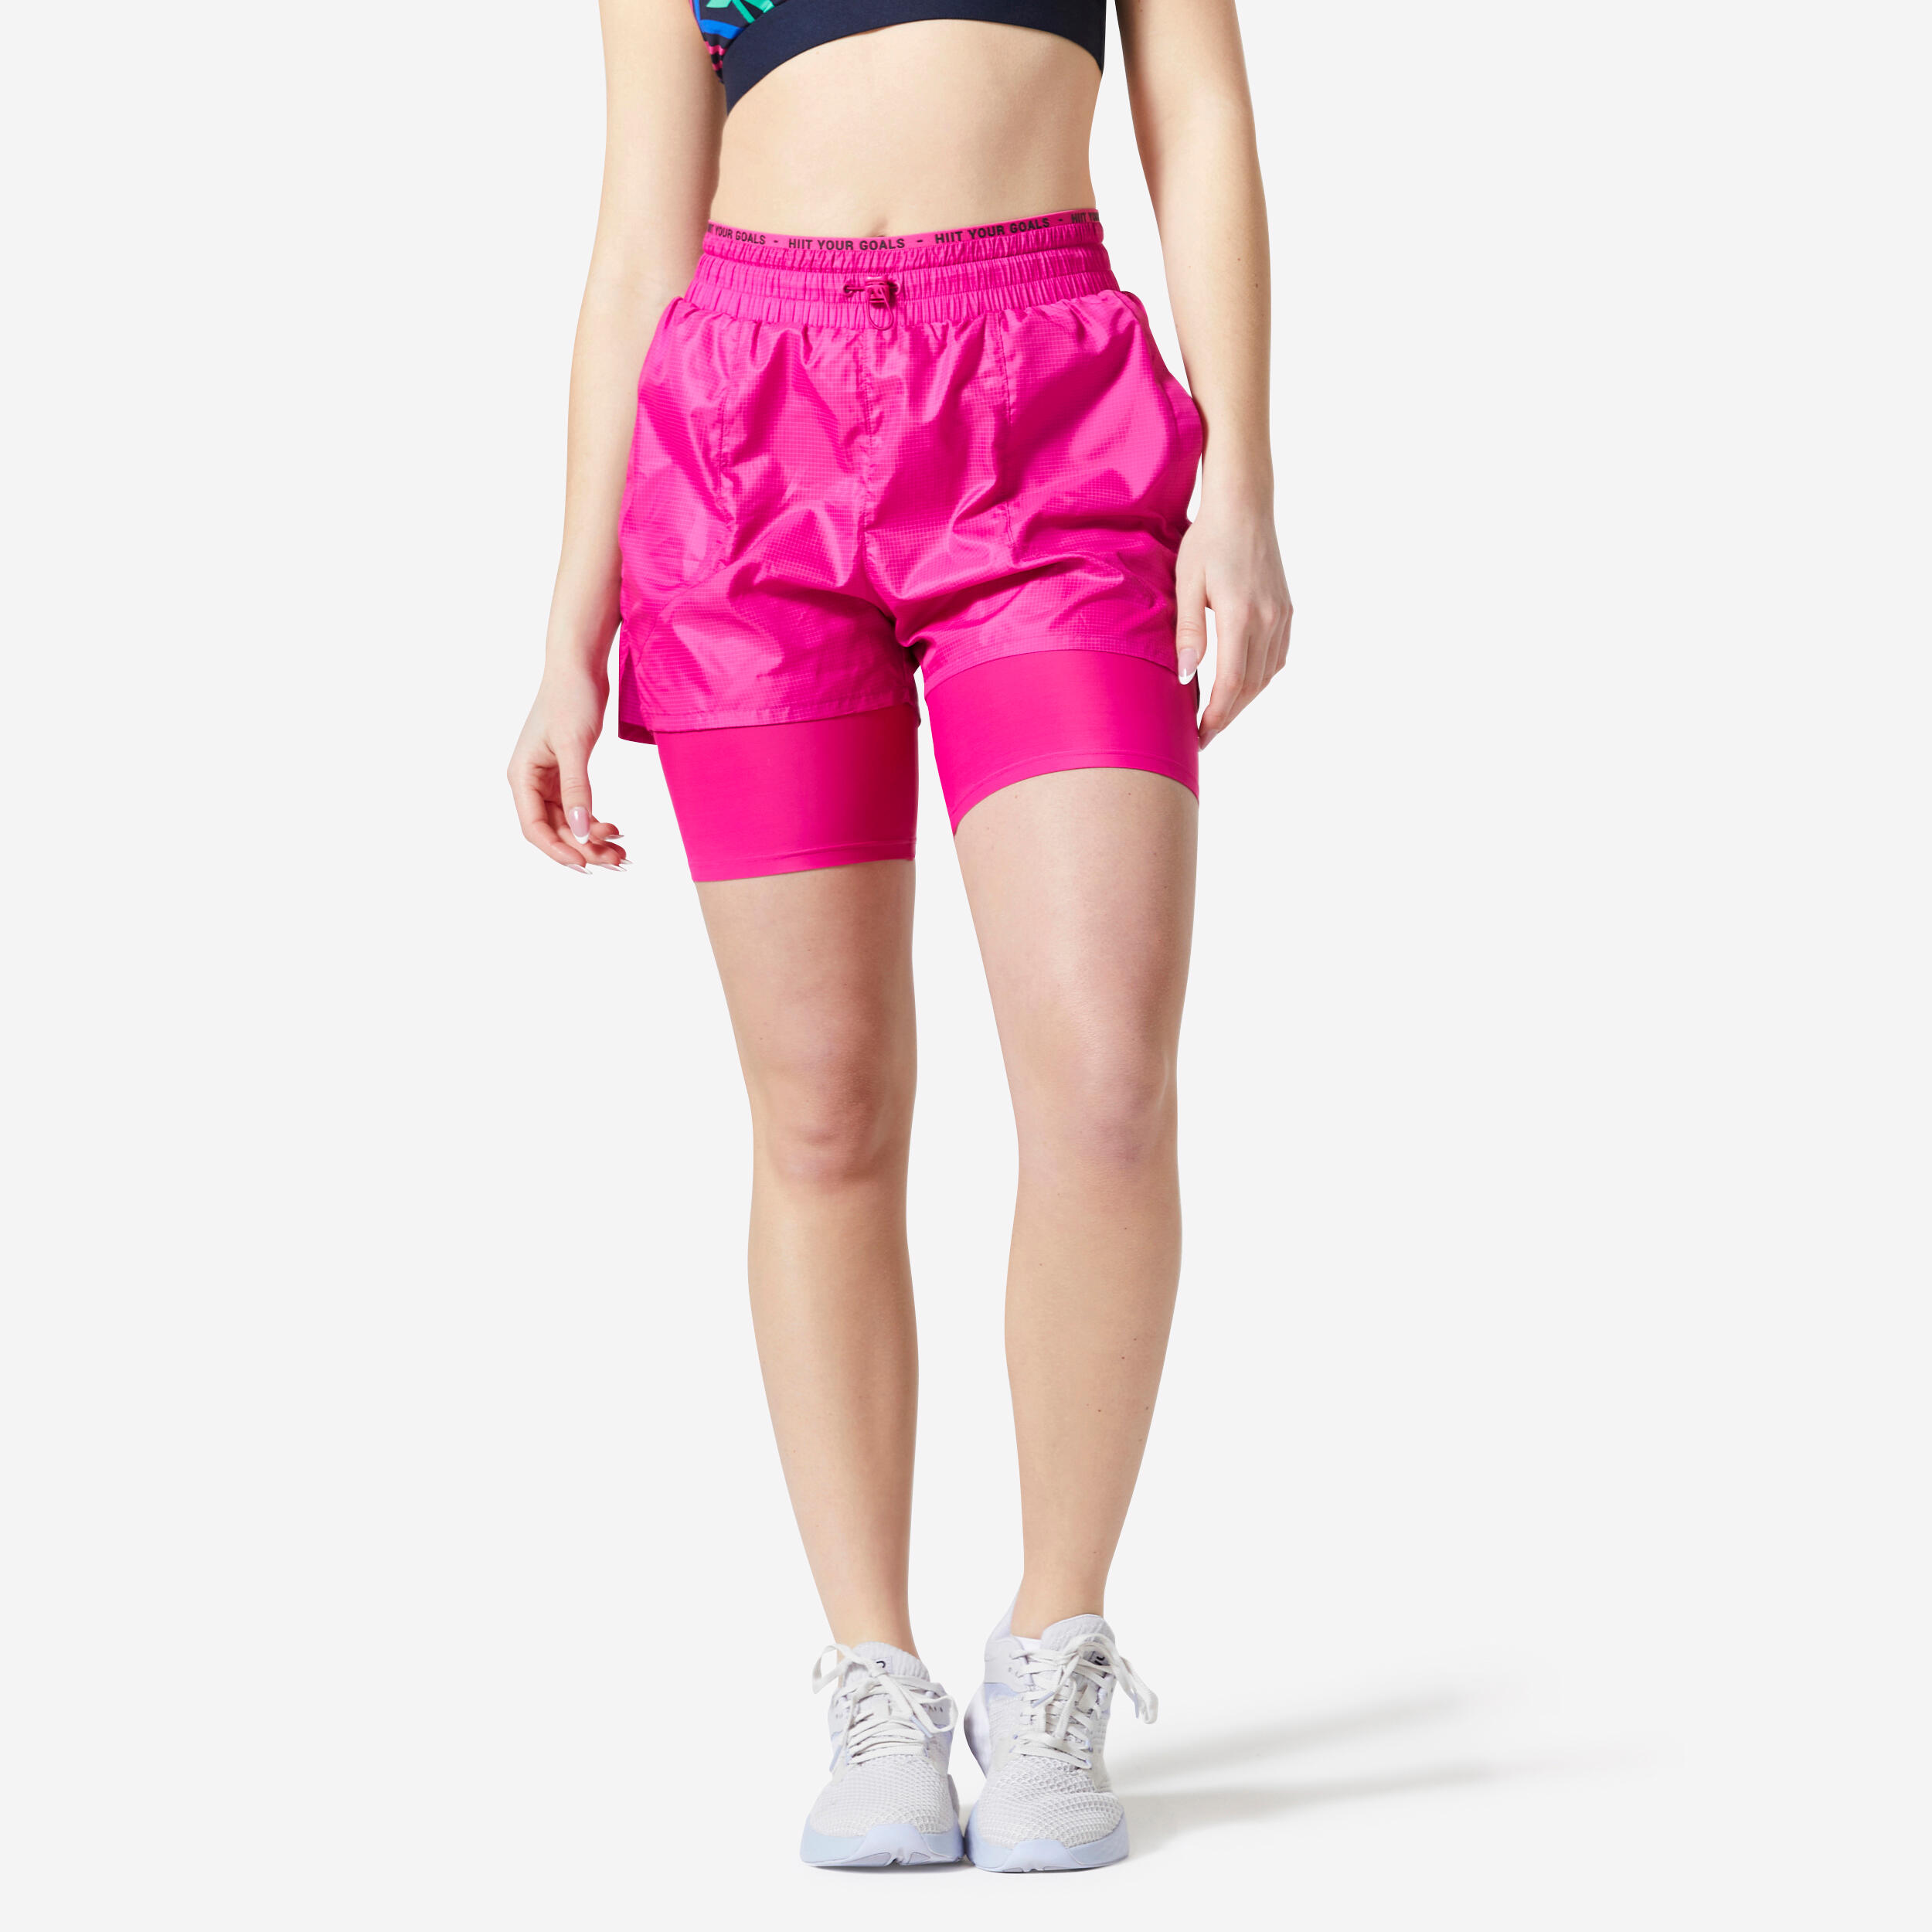 Women's 2-in-1 Fitness Cardio Shorts - Pink 1/5